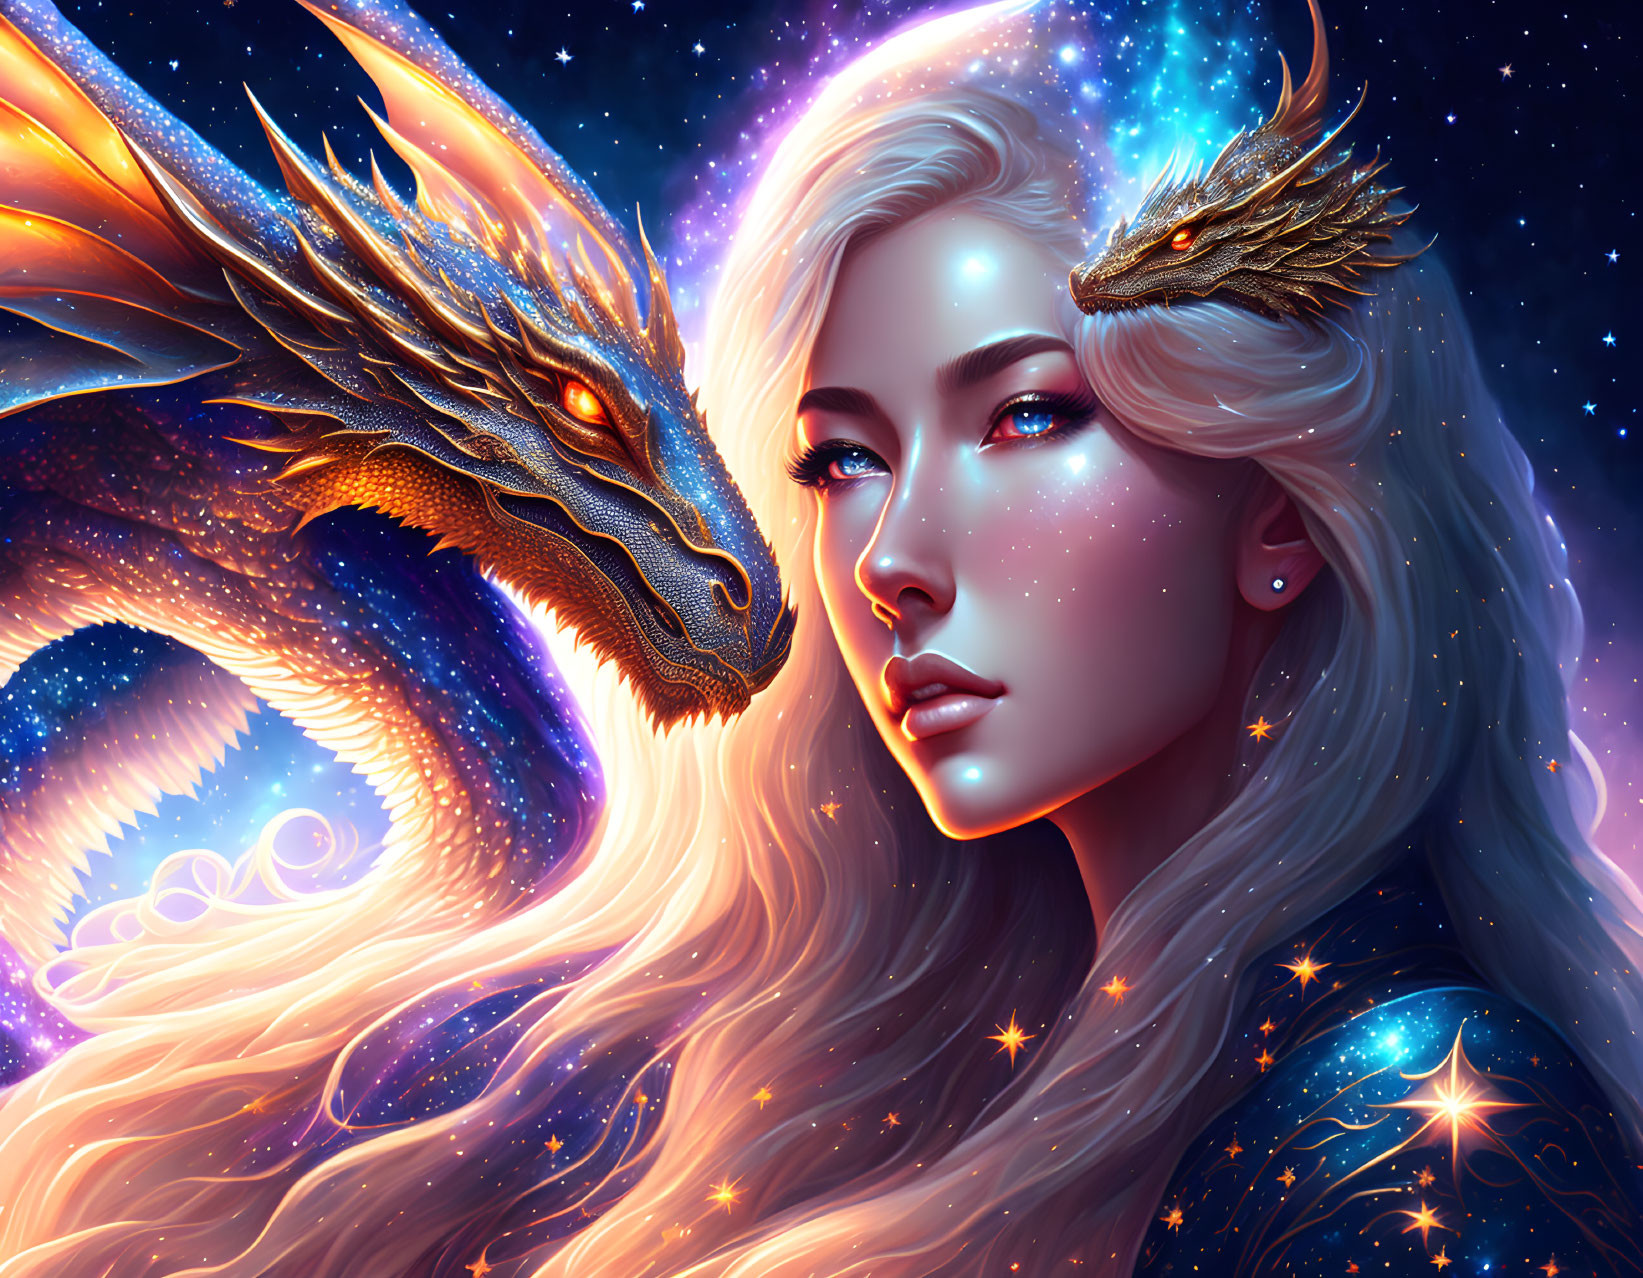 Blonde-haired woman and dragon in cosmic digital art